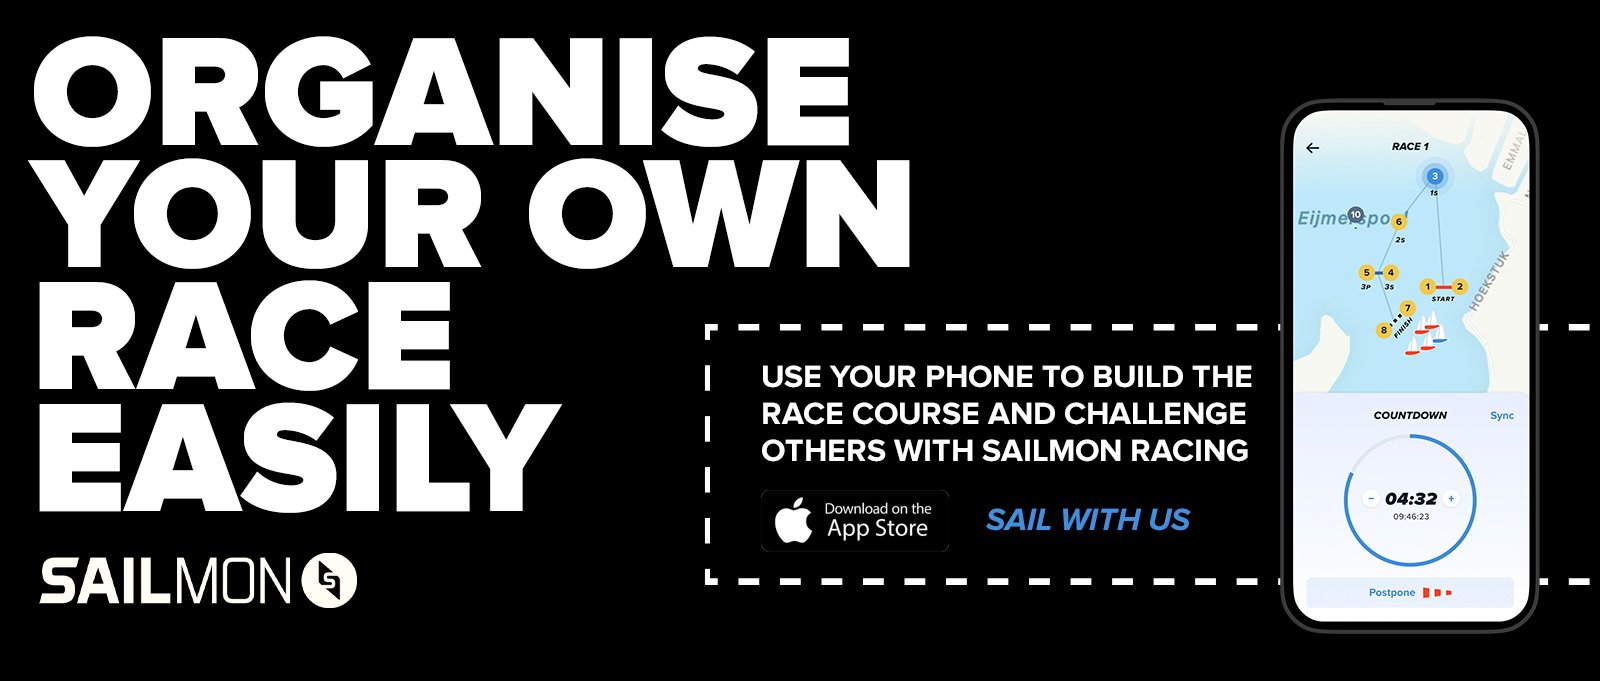 Organise your own race easily with Sailmon Racing